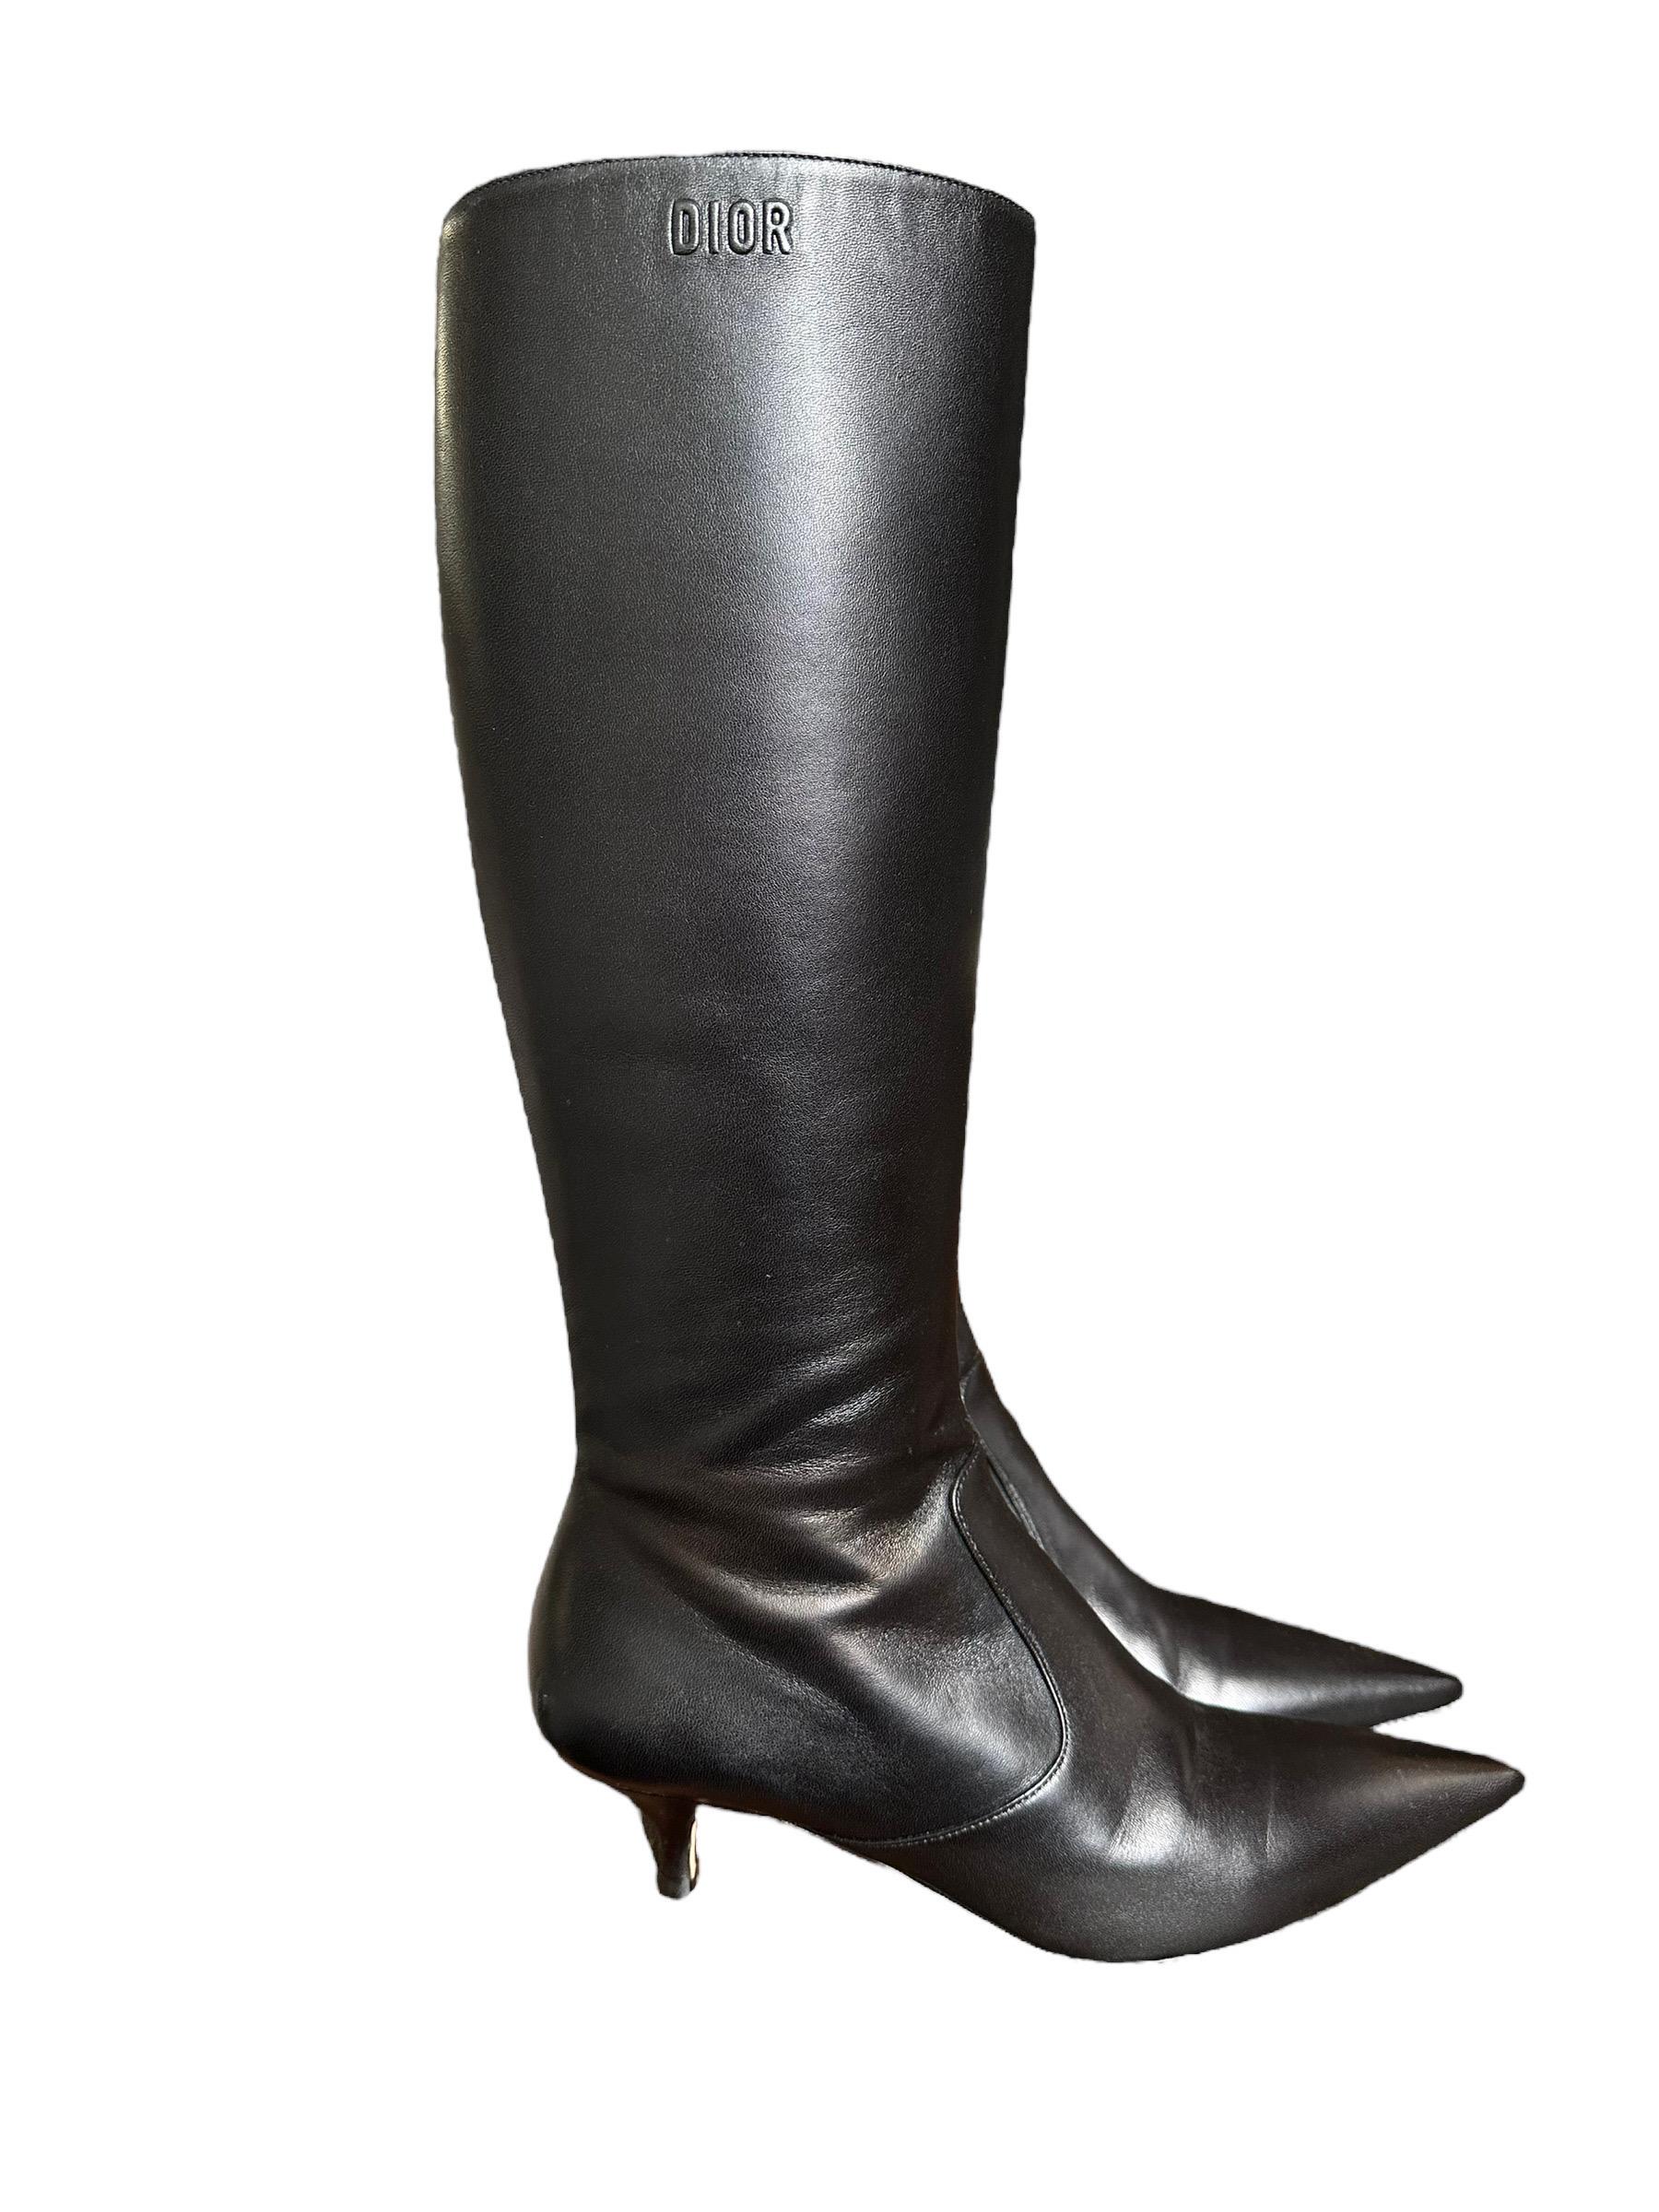 Women's Dior Boots Black Leather Low Heels